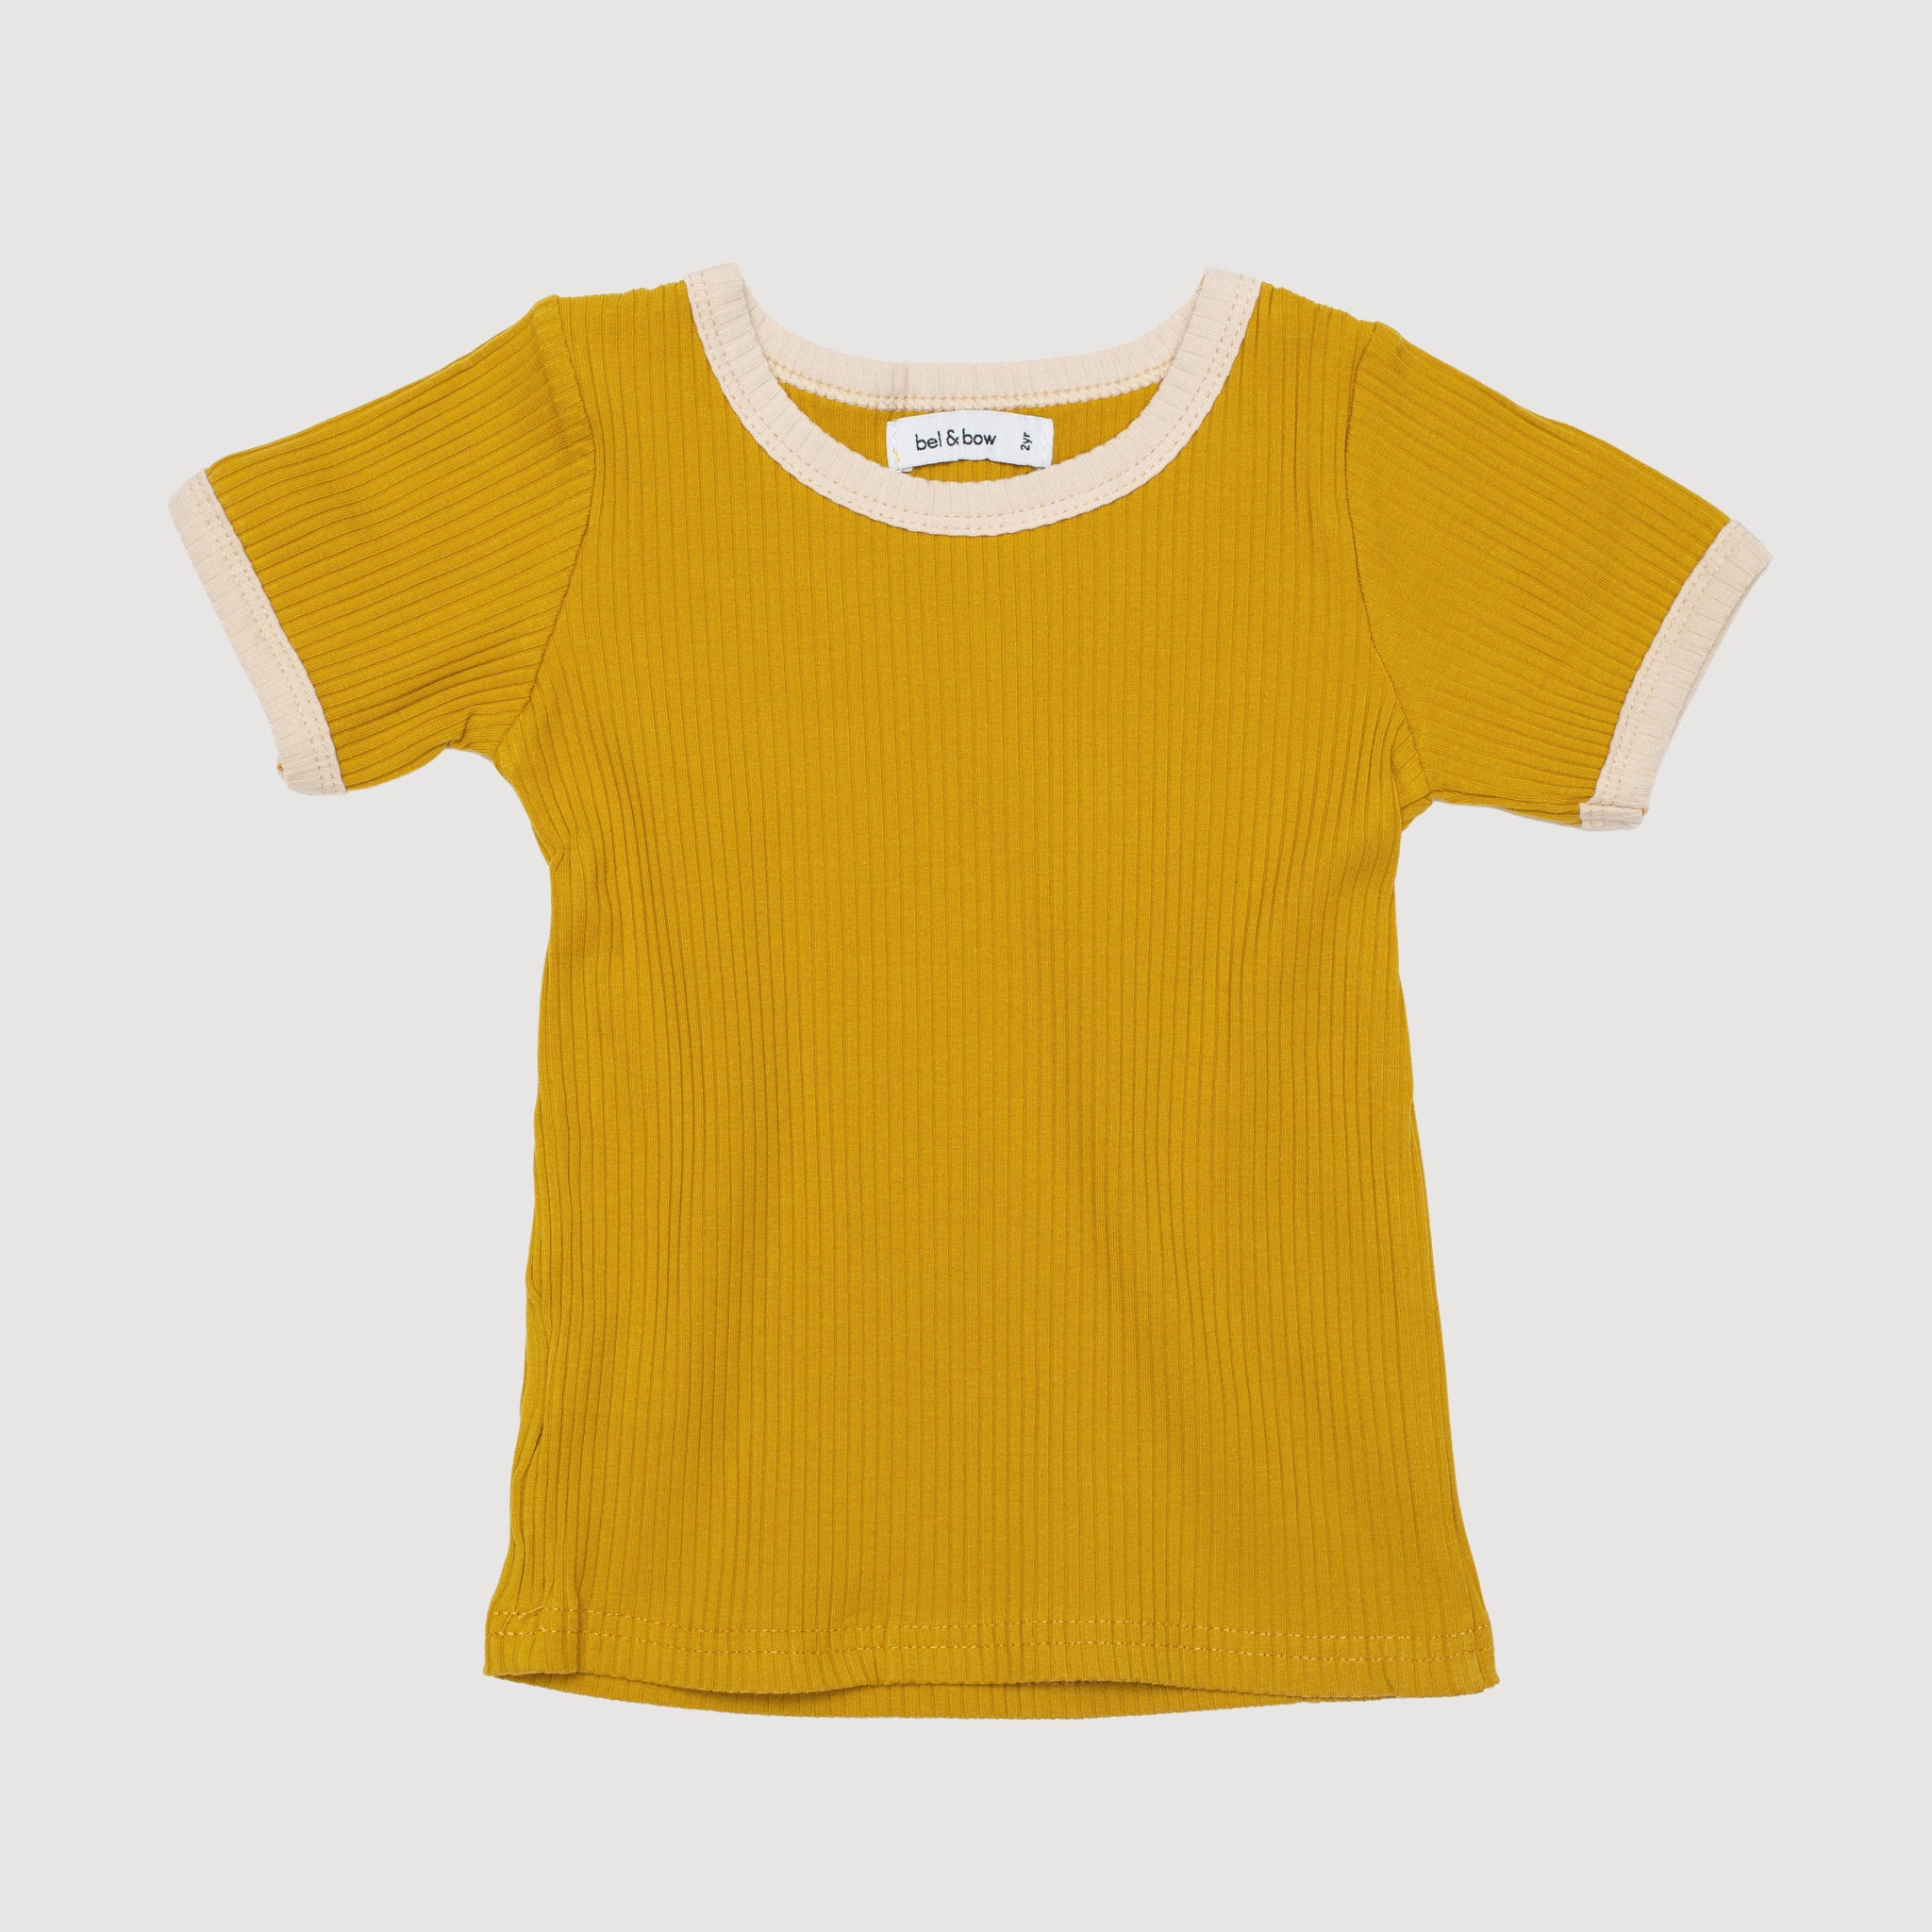 Retro Ringer Ribbed Tee - Gold bel & bow